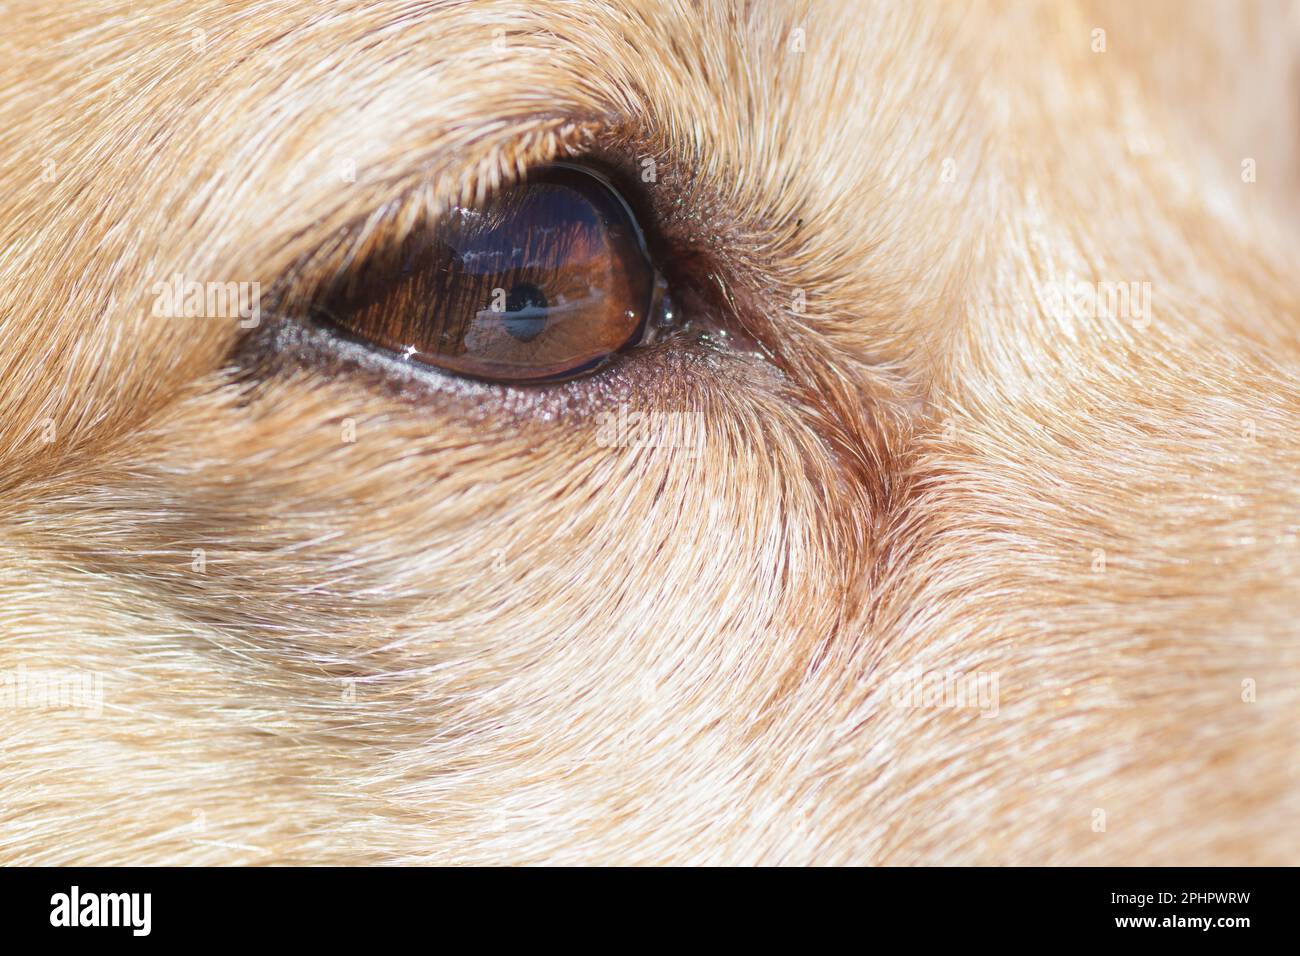 Close-up of right eye with brown iris and light brown hair on the face of a small dog. Pets, vision, eye disease and observation concepts Stock Photo